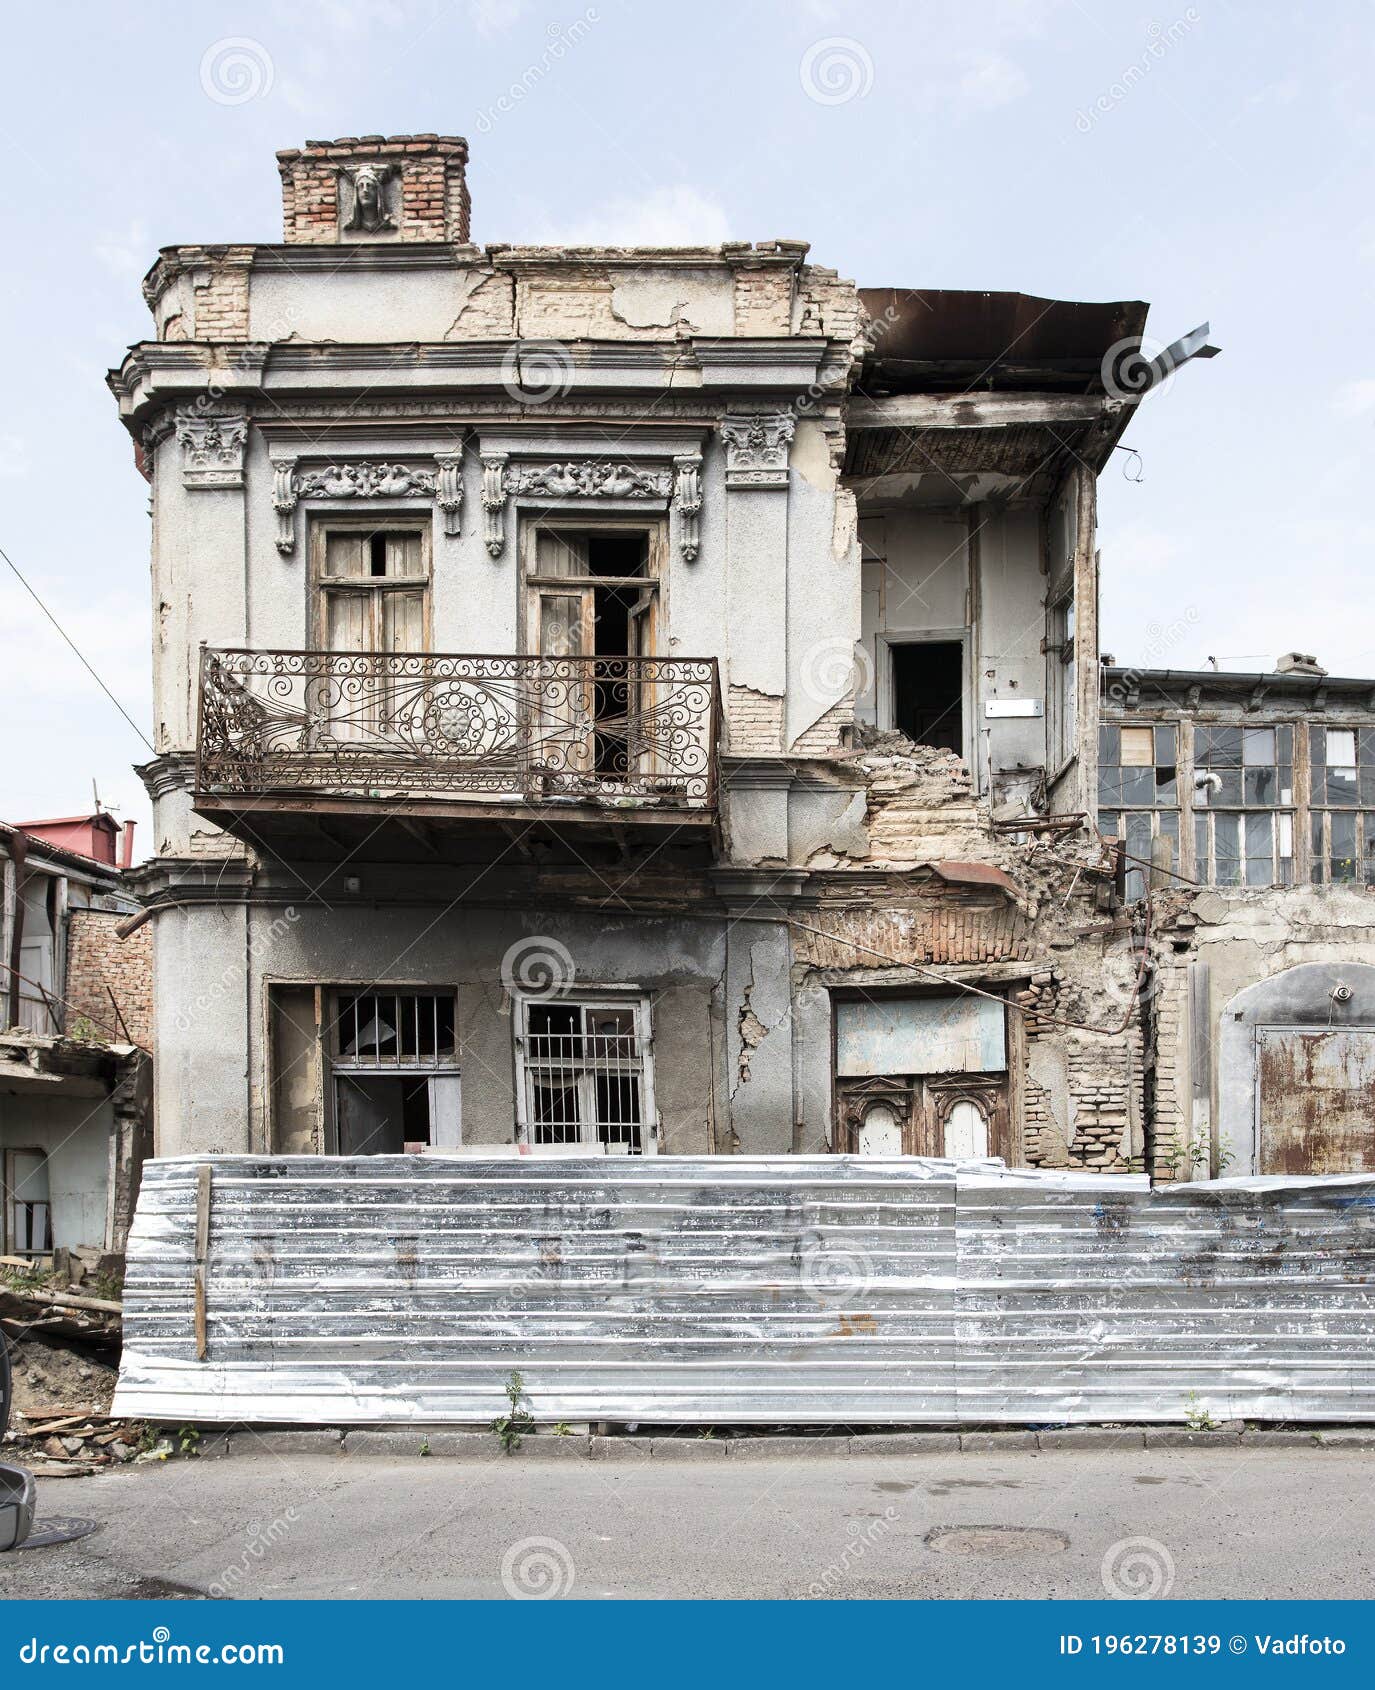 Old Destroyed Building, Structure in Disrepair Stock Image - Image of ...